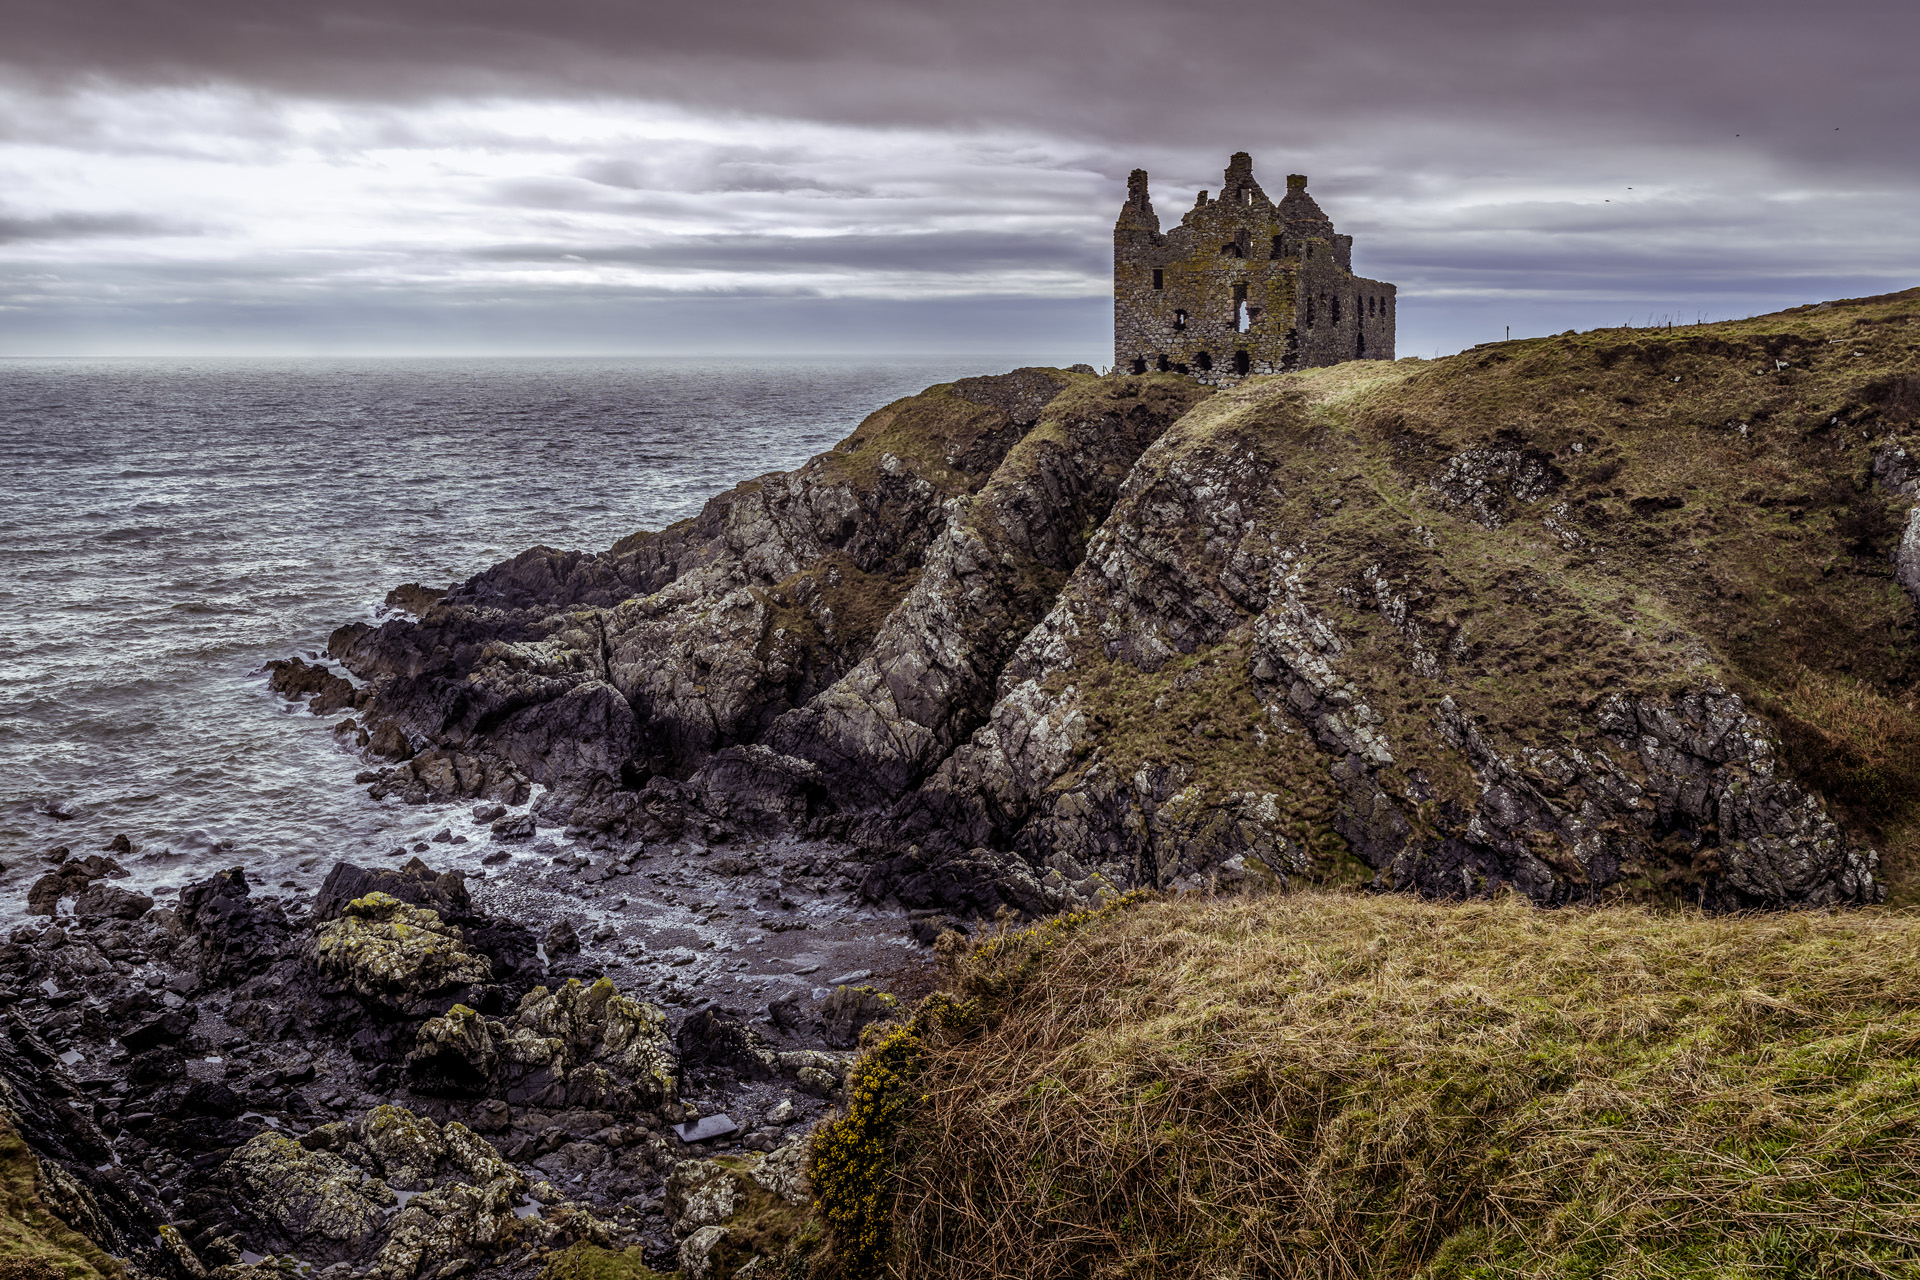 Dunskey Castle situated on cliff edge which protrudes into the sea, built in 12th Century. This is an iconioc landmark in Scotland sitated about half a mile from Portpatrick on the west coast.